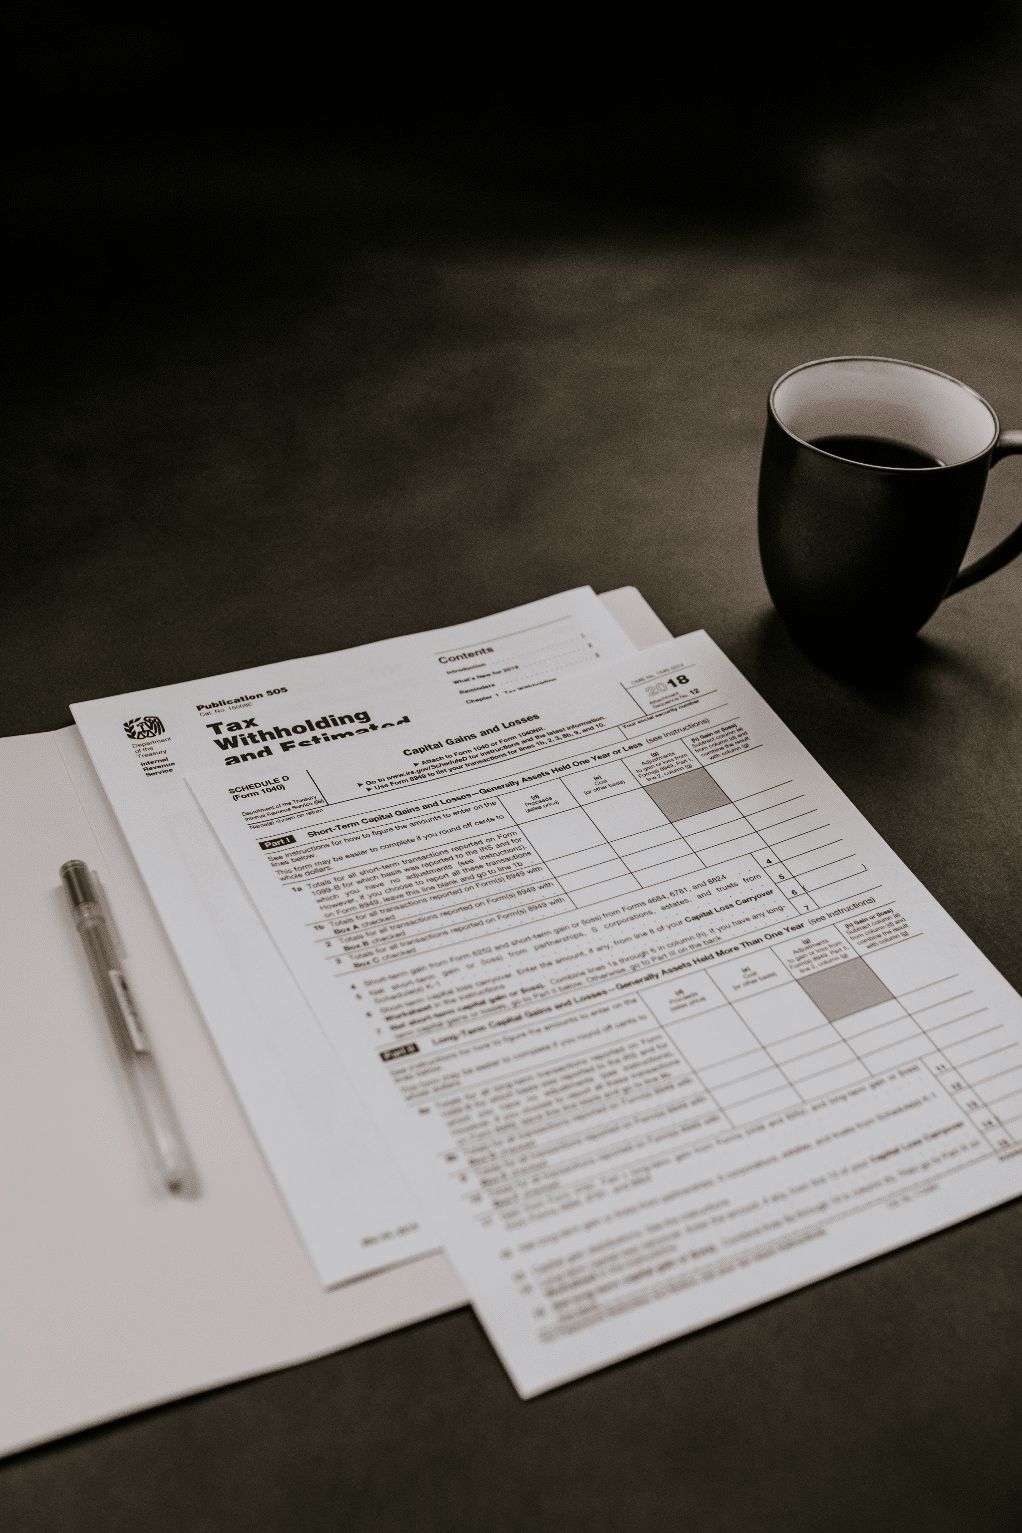  Tax reports lying next to coffee.